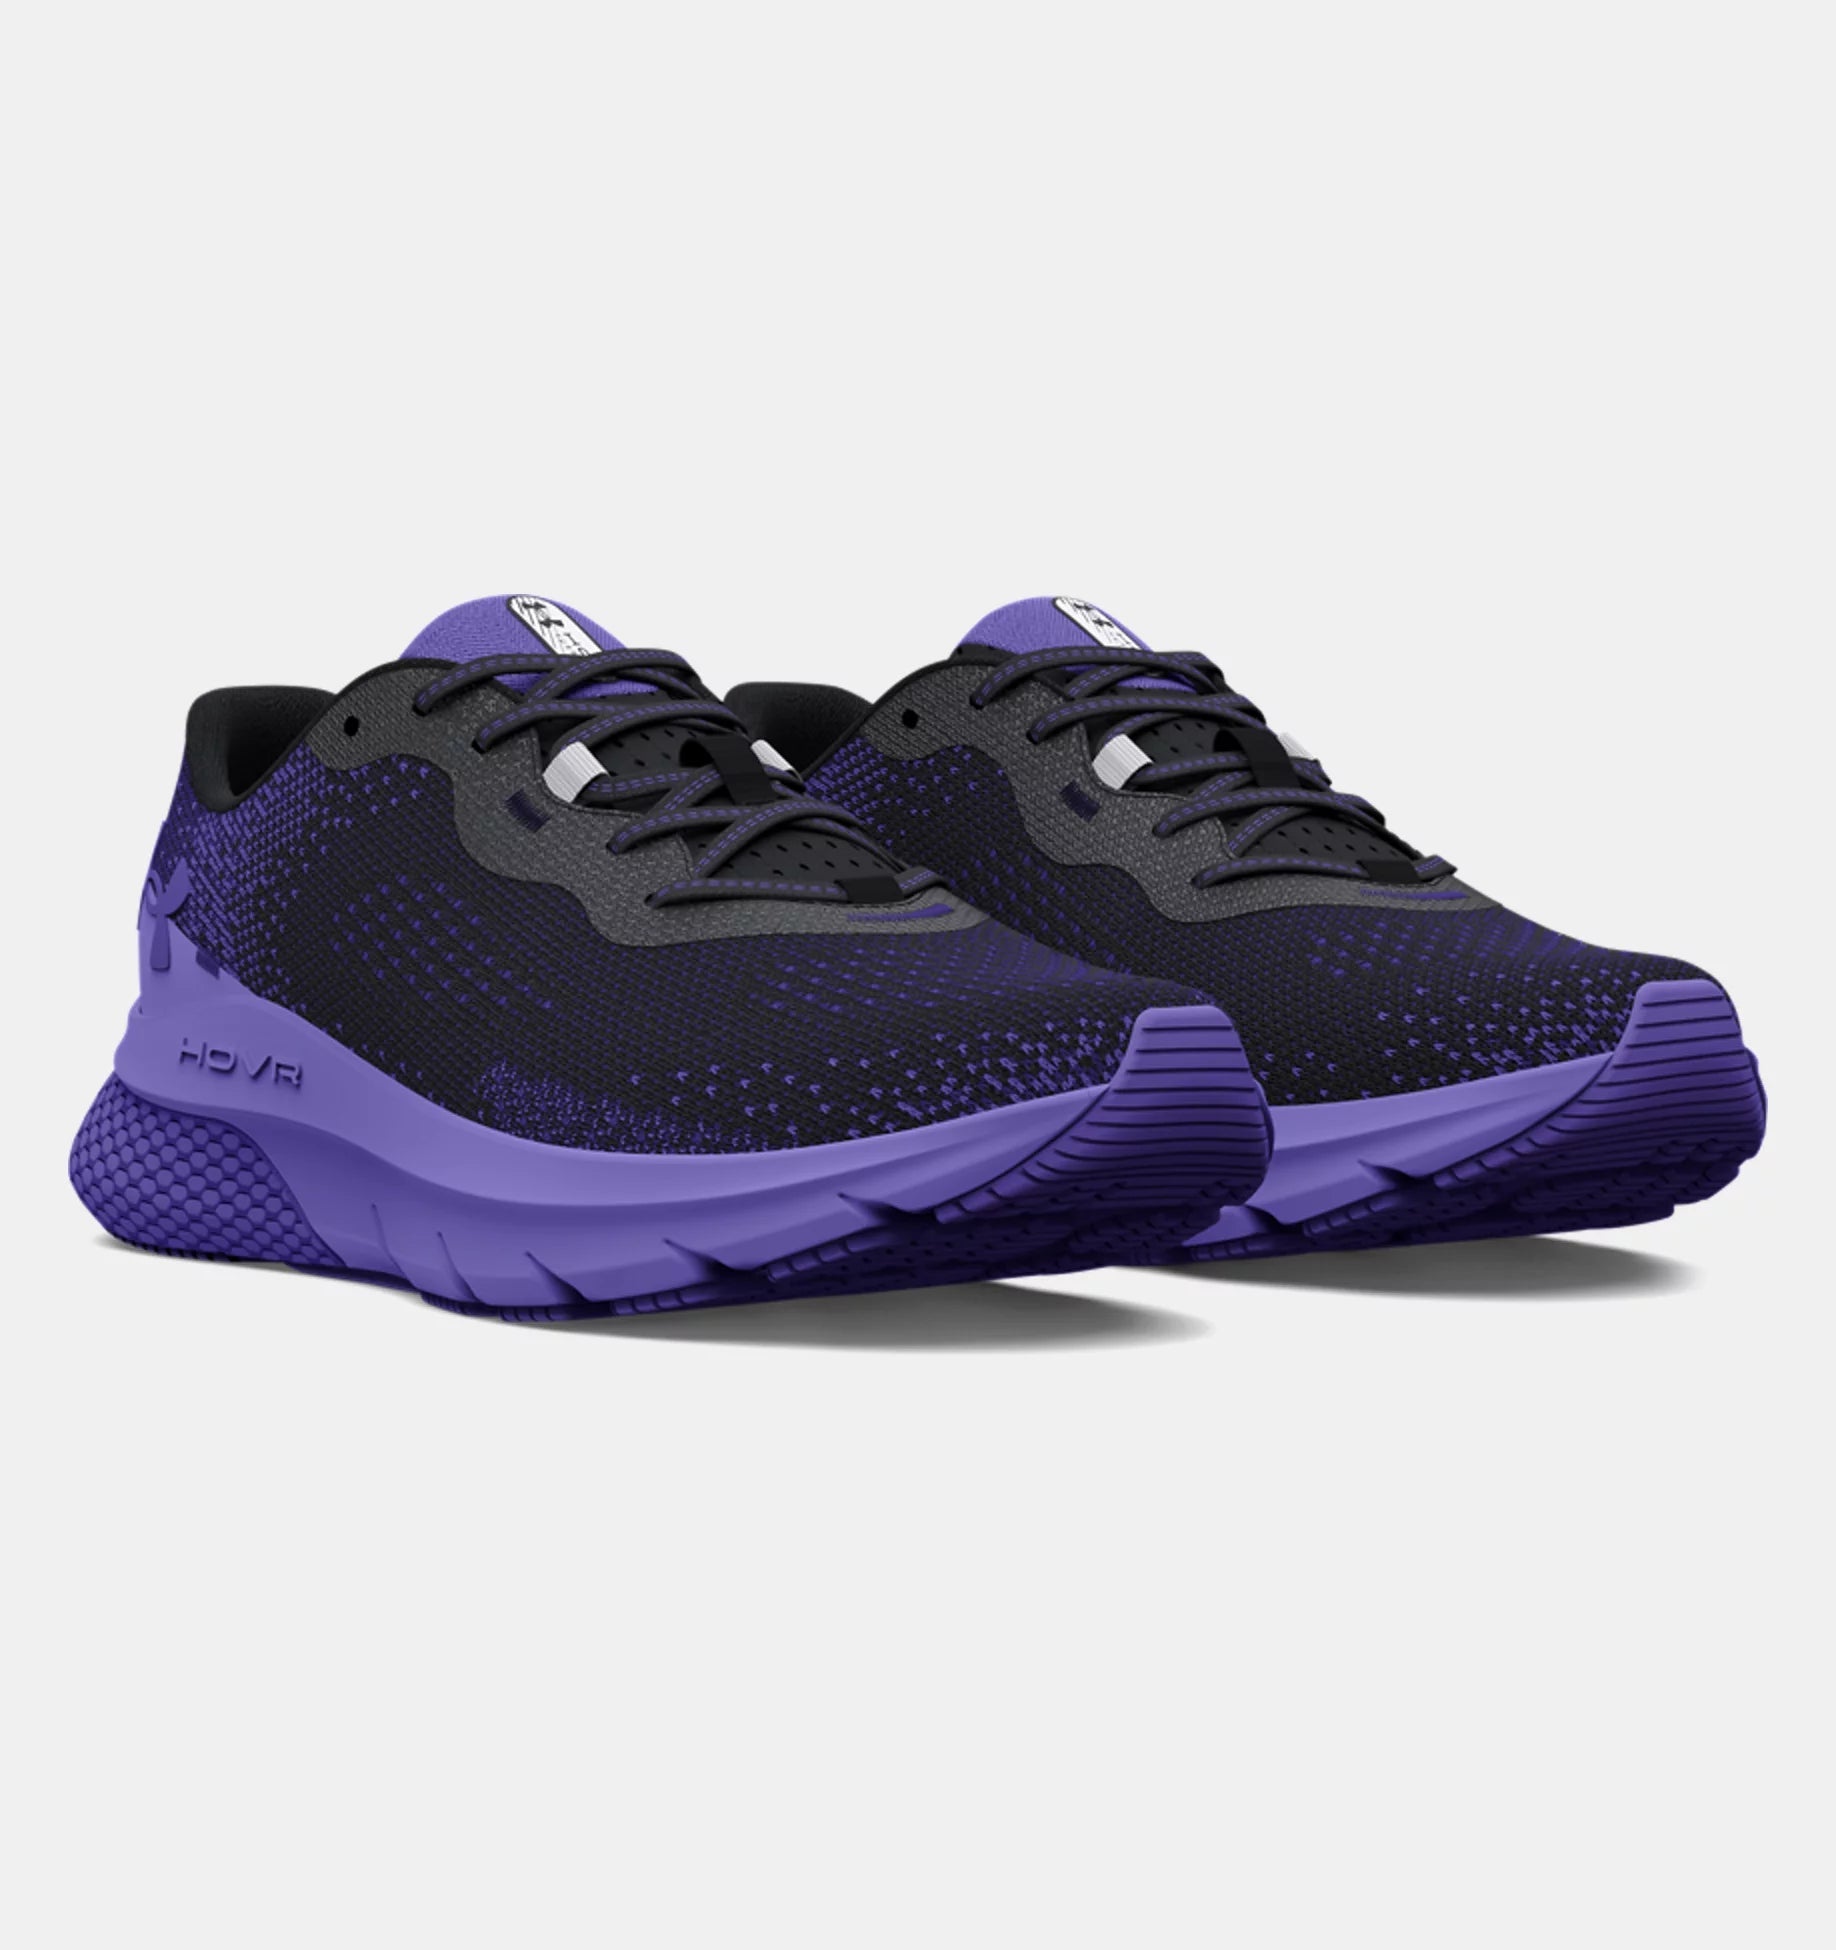 Women's HOVR Turbulence 2 - The Shoe CollectiveUnder Armour